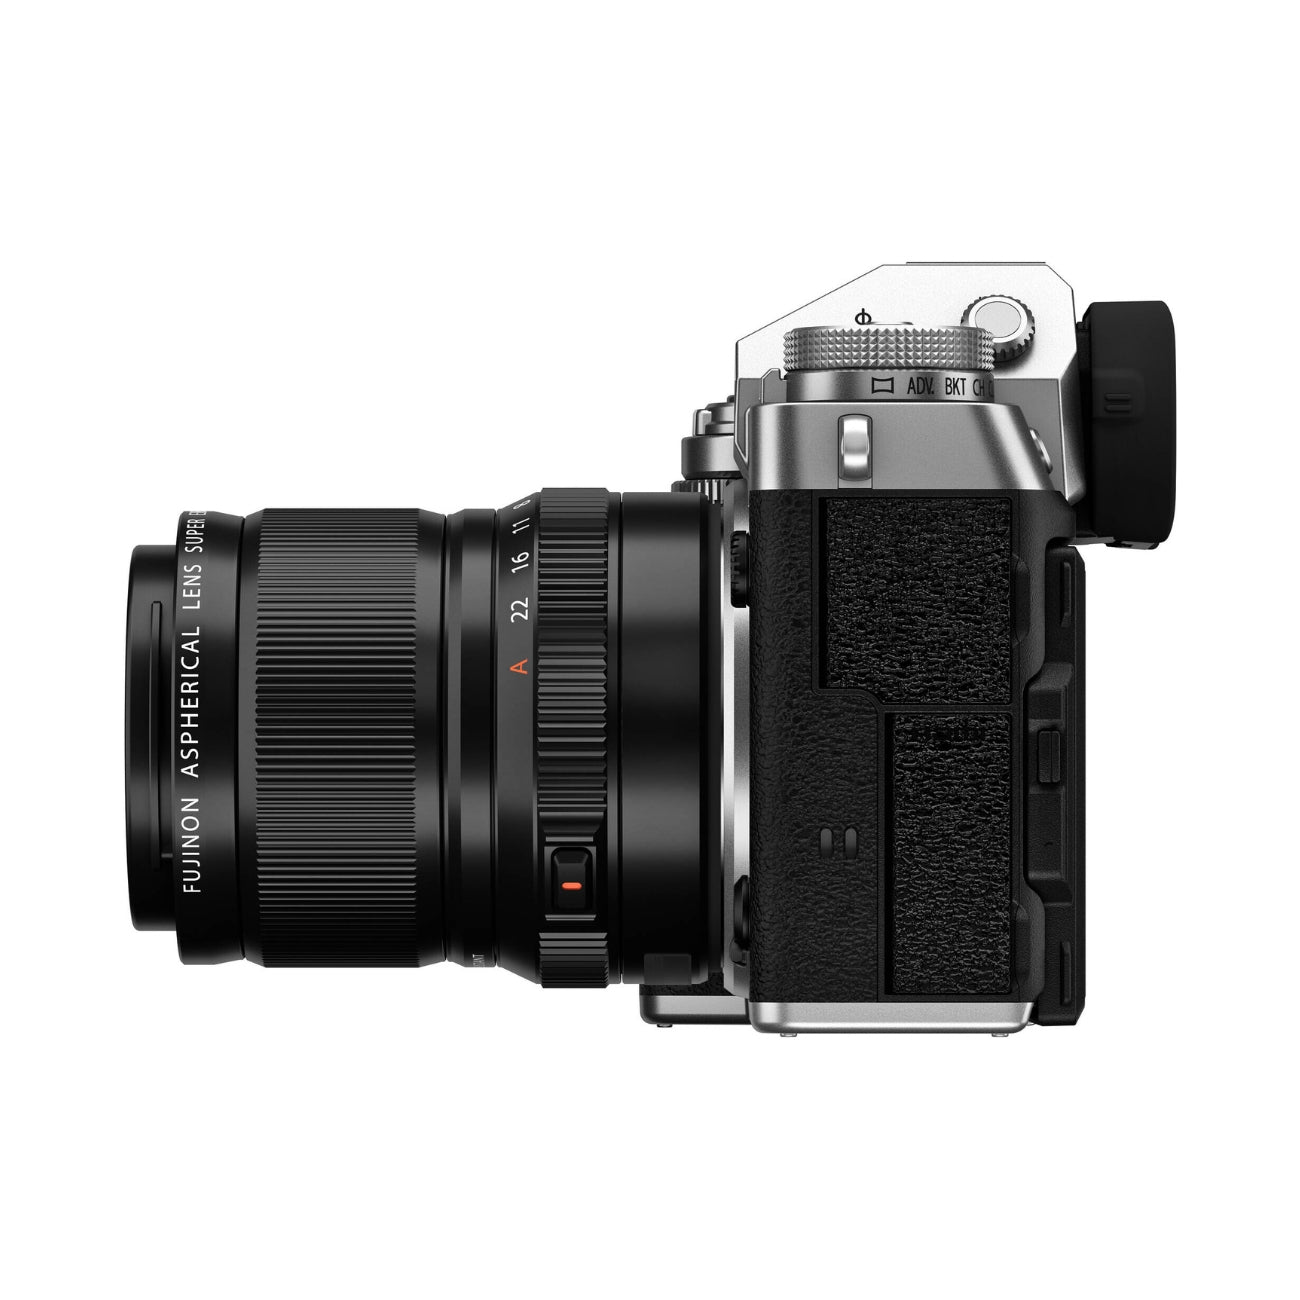 Fujifilm X-T5 Mirrorless Camera (Silver) with Lens - Side view